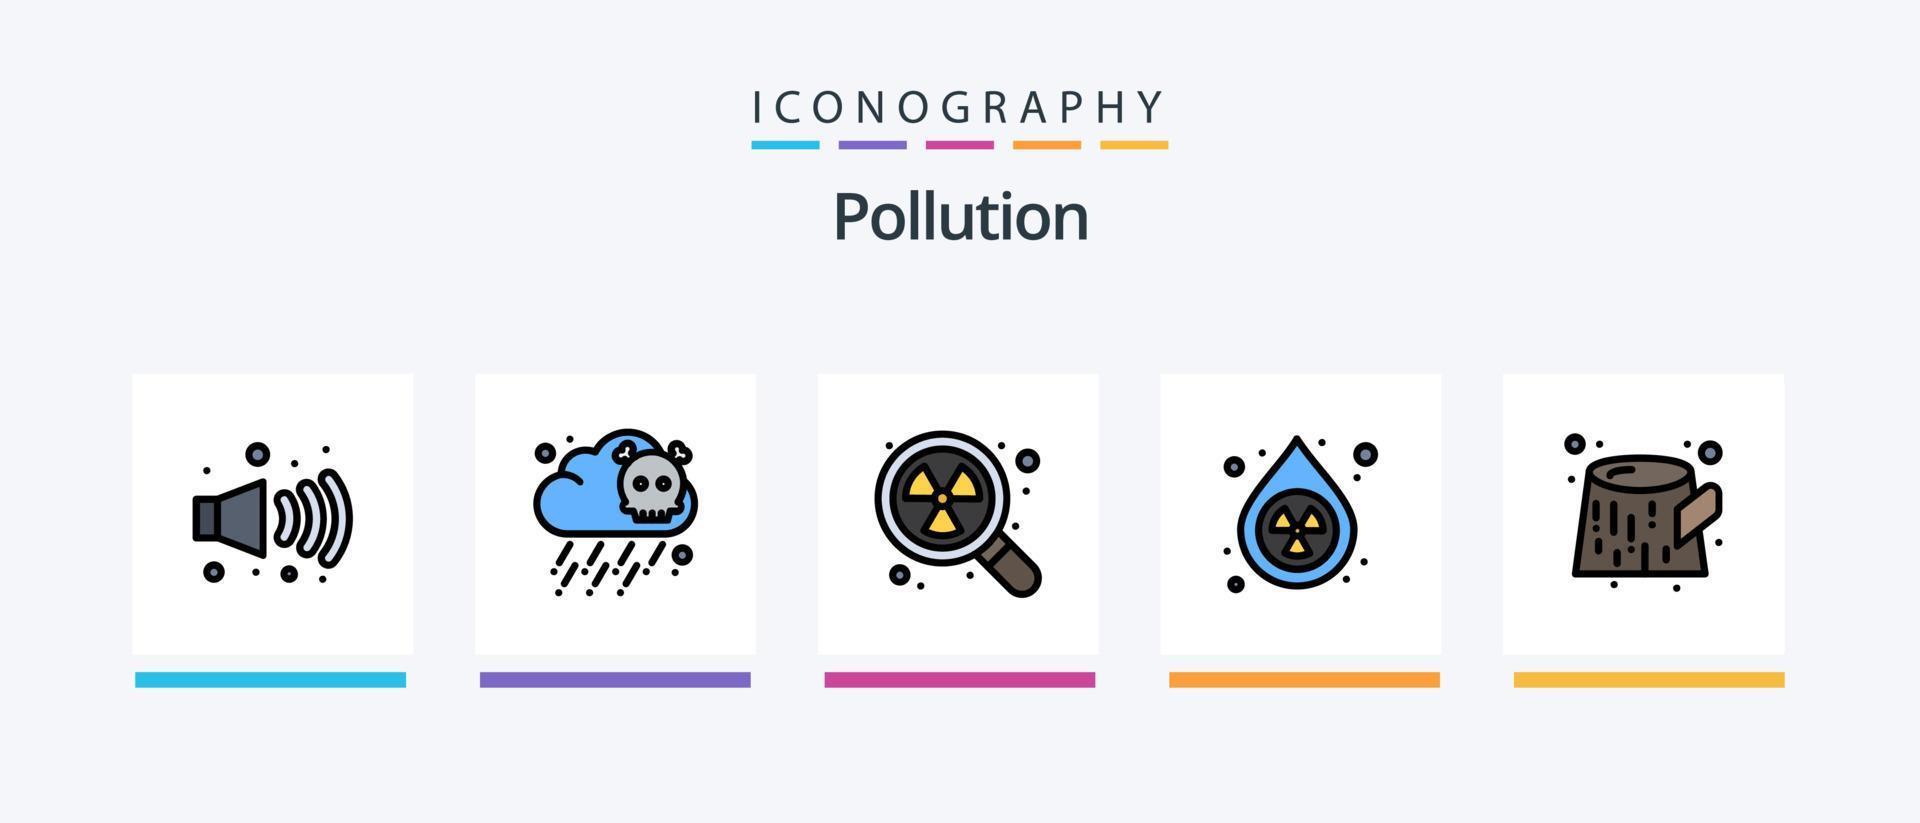 Pollution Line Filled 5 Icon Pack Including co dioxide. carbon. drop. search. radioactive. Creative Icons Design vector